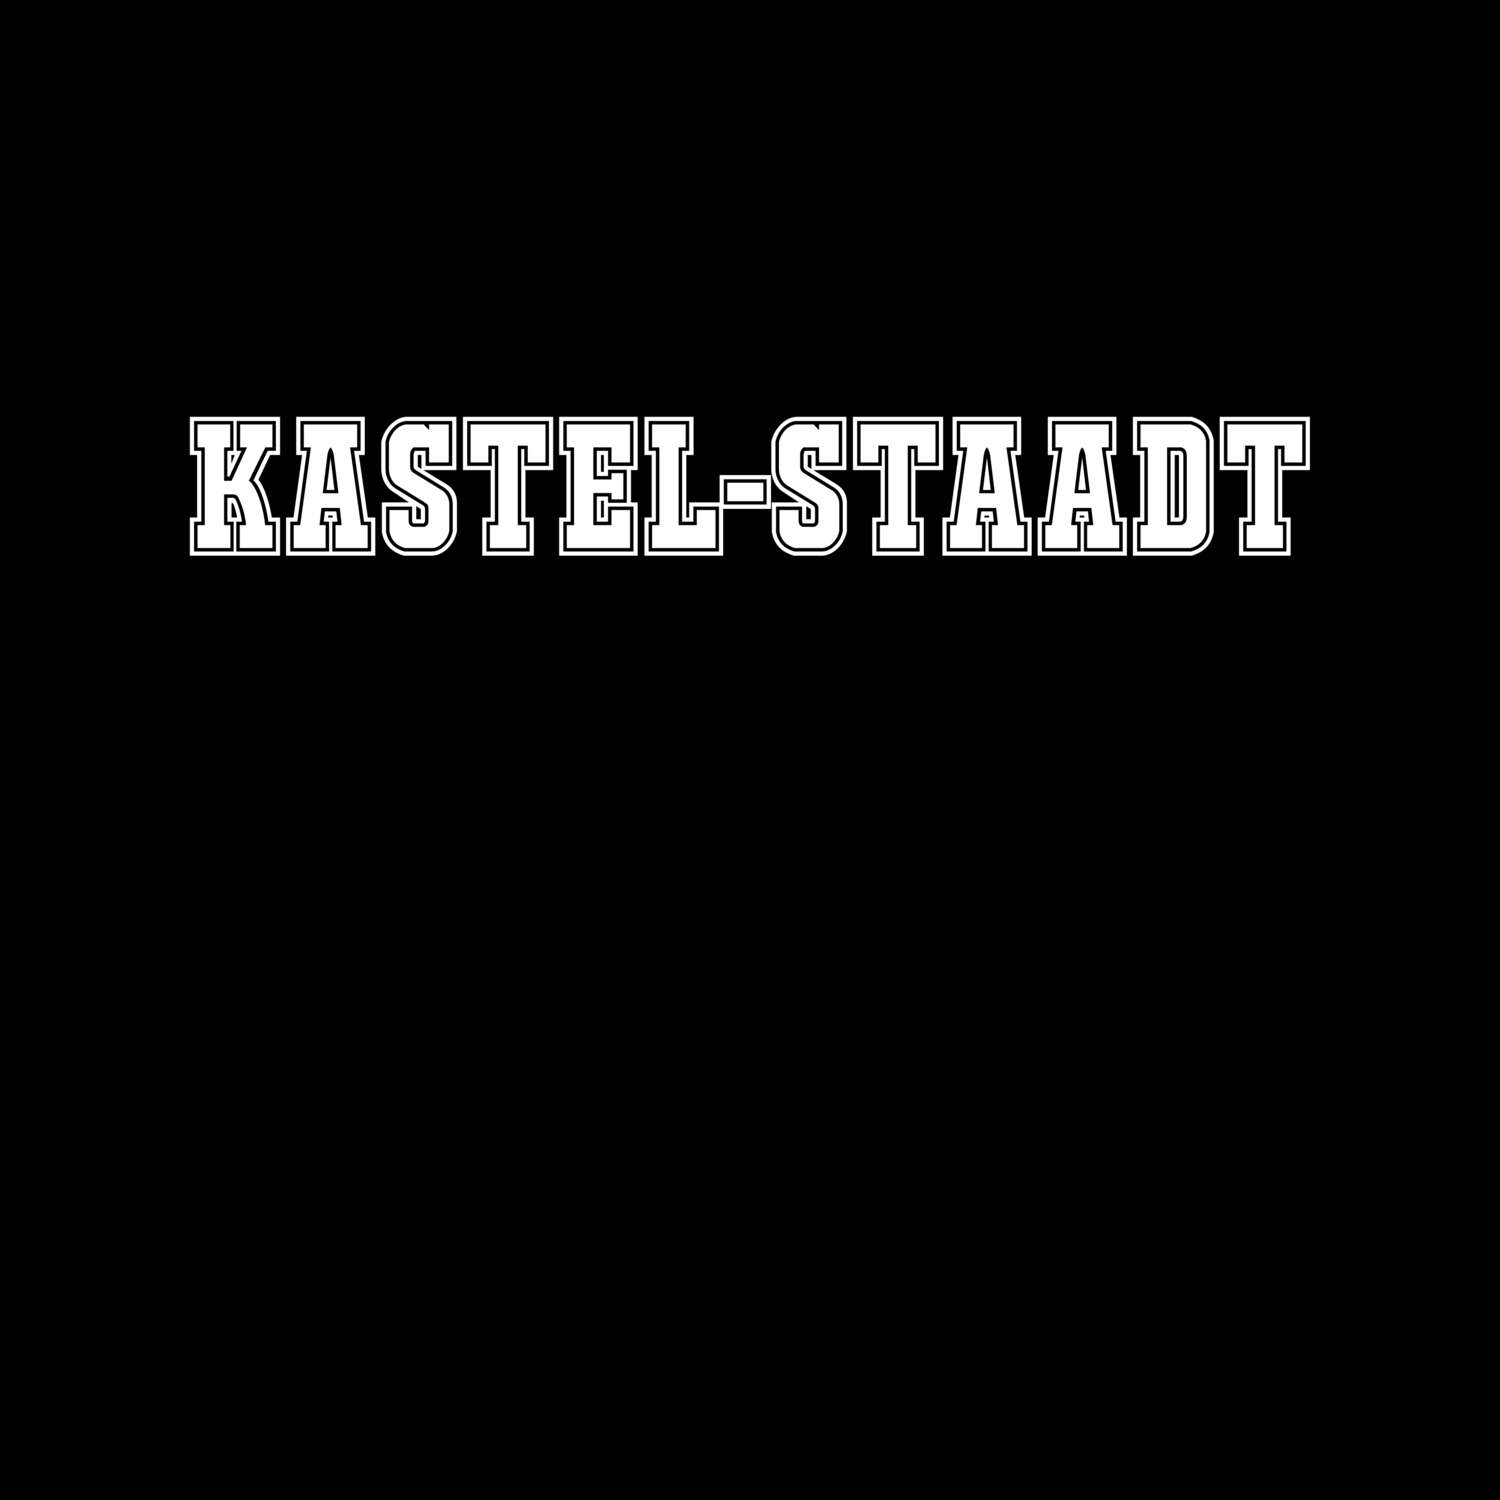 Kastel-Staadt T-Shirt »Classic«